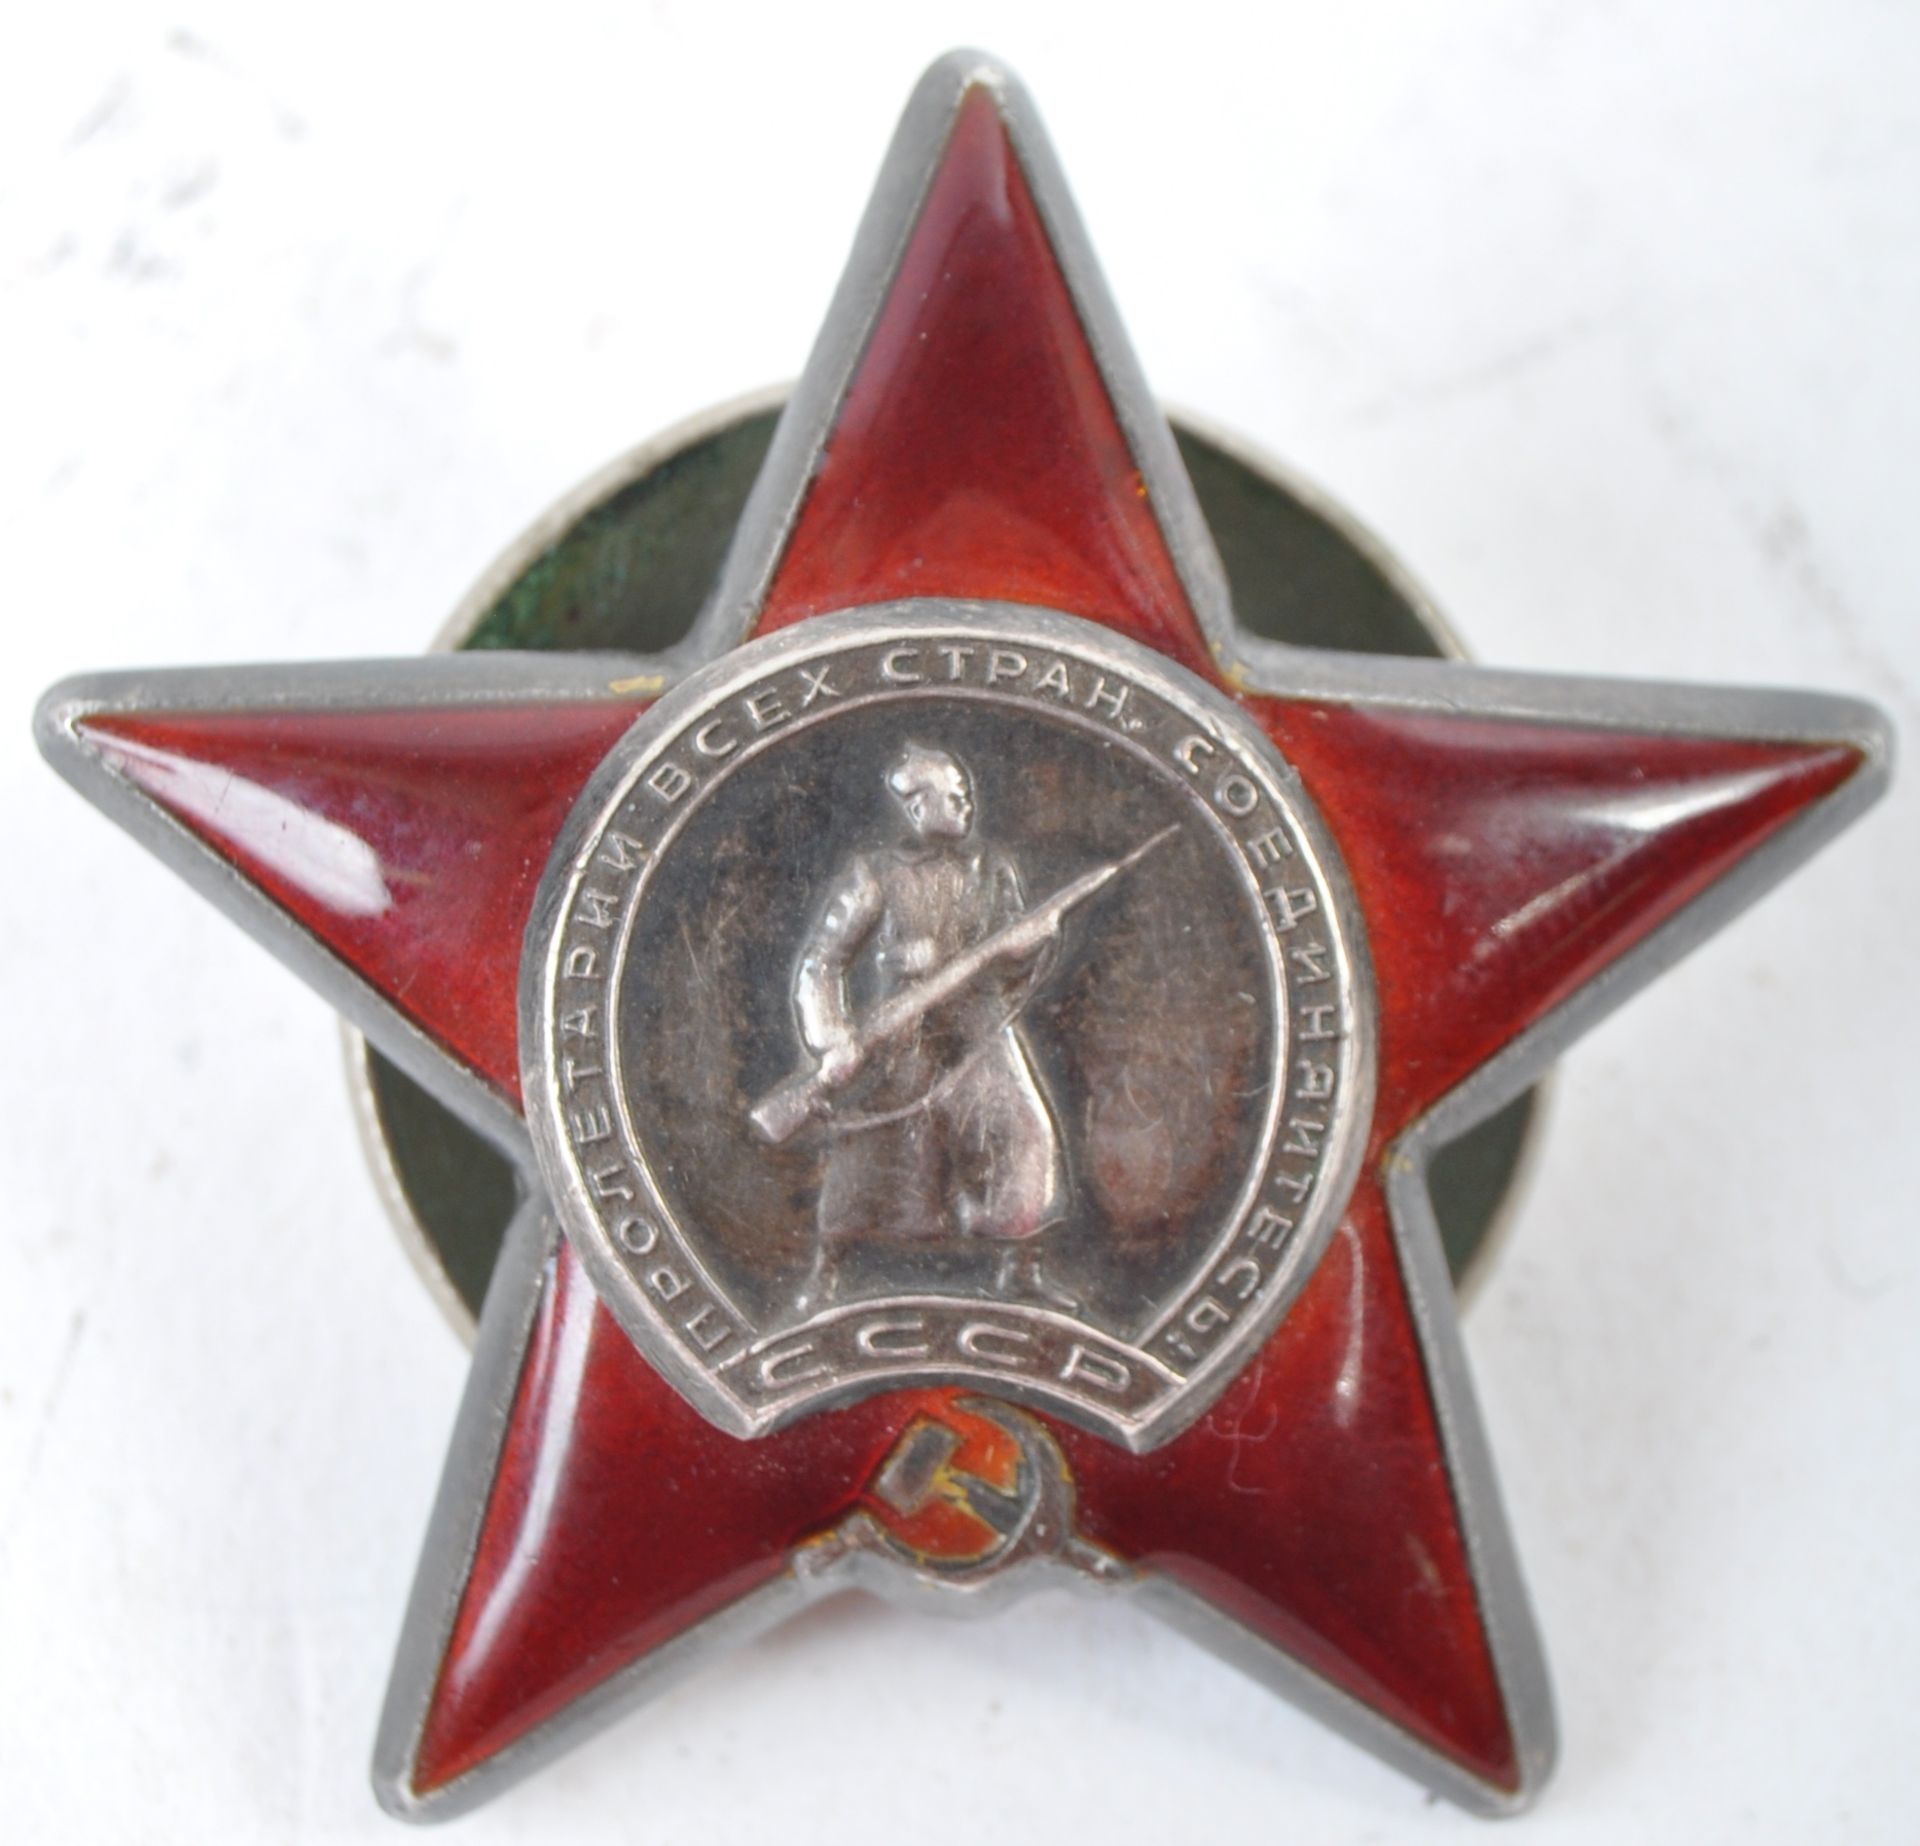 ORIGINAL RUSSIAN ORDER OF THE RED STAR MEDAL